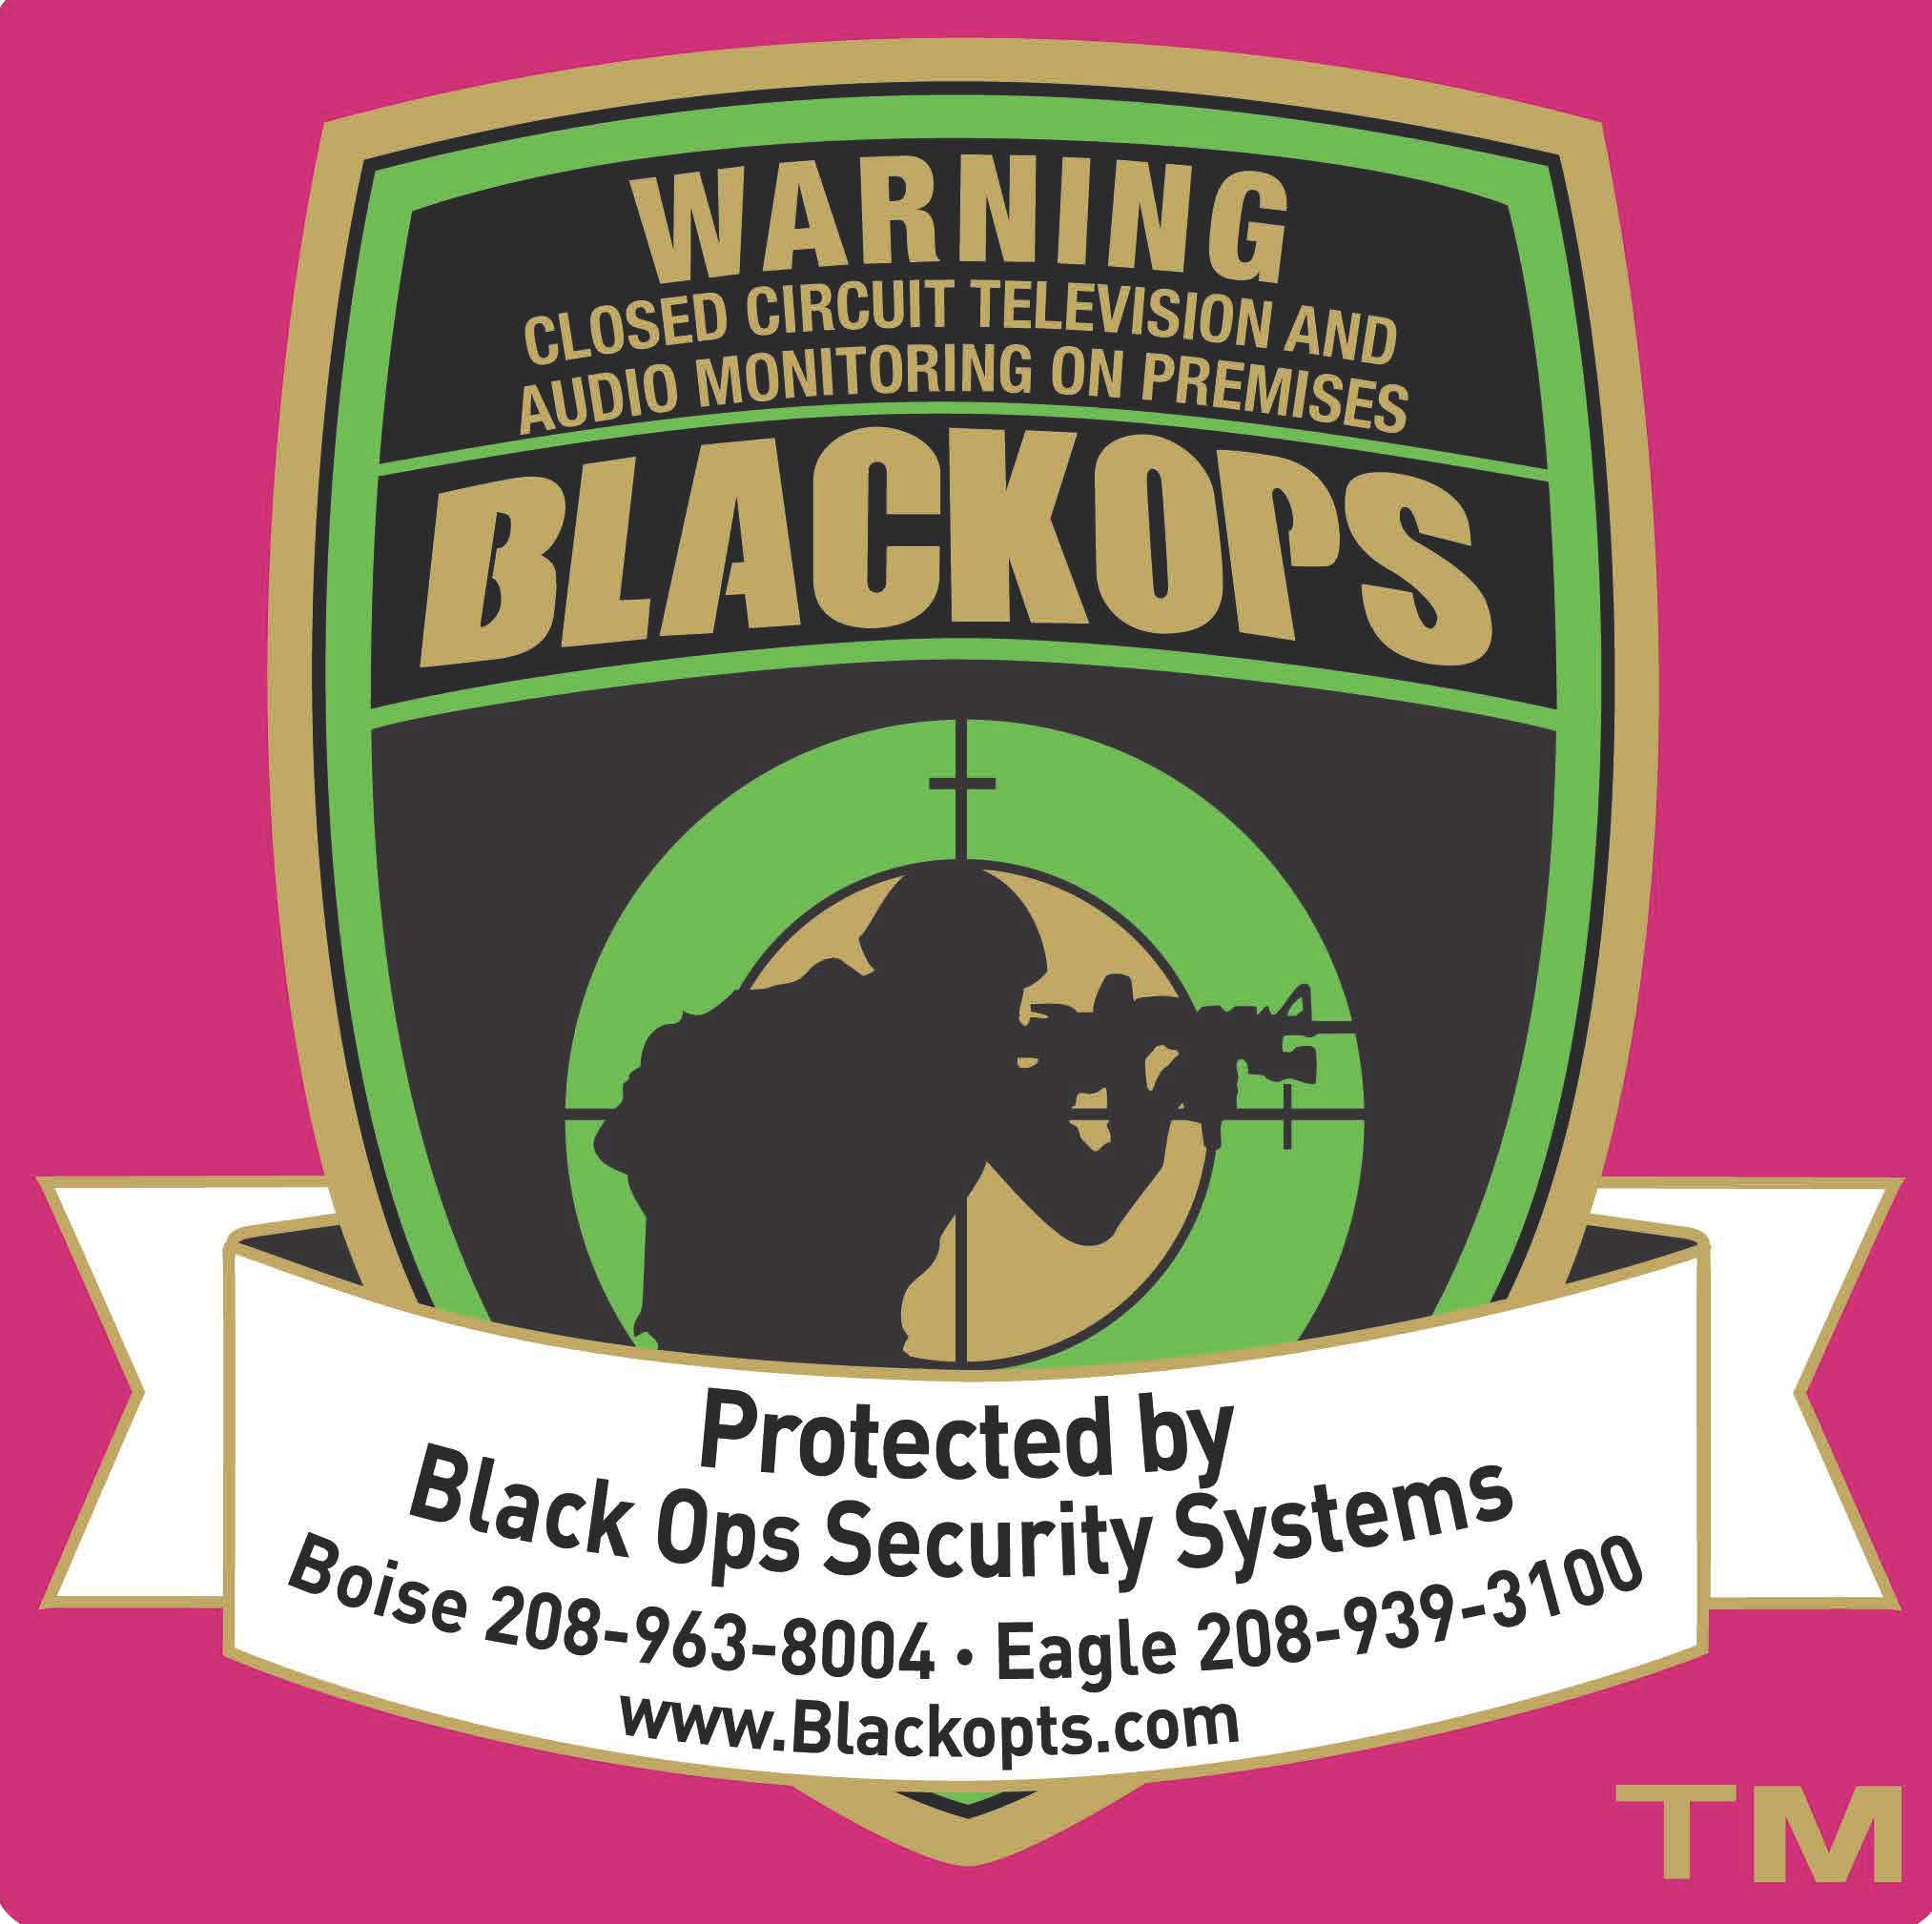 Black Ops Security Systems